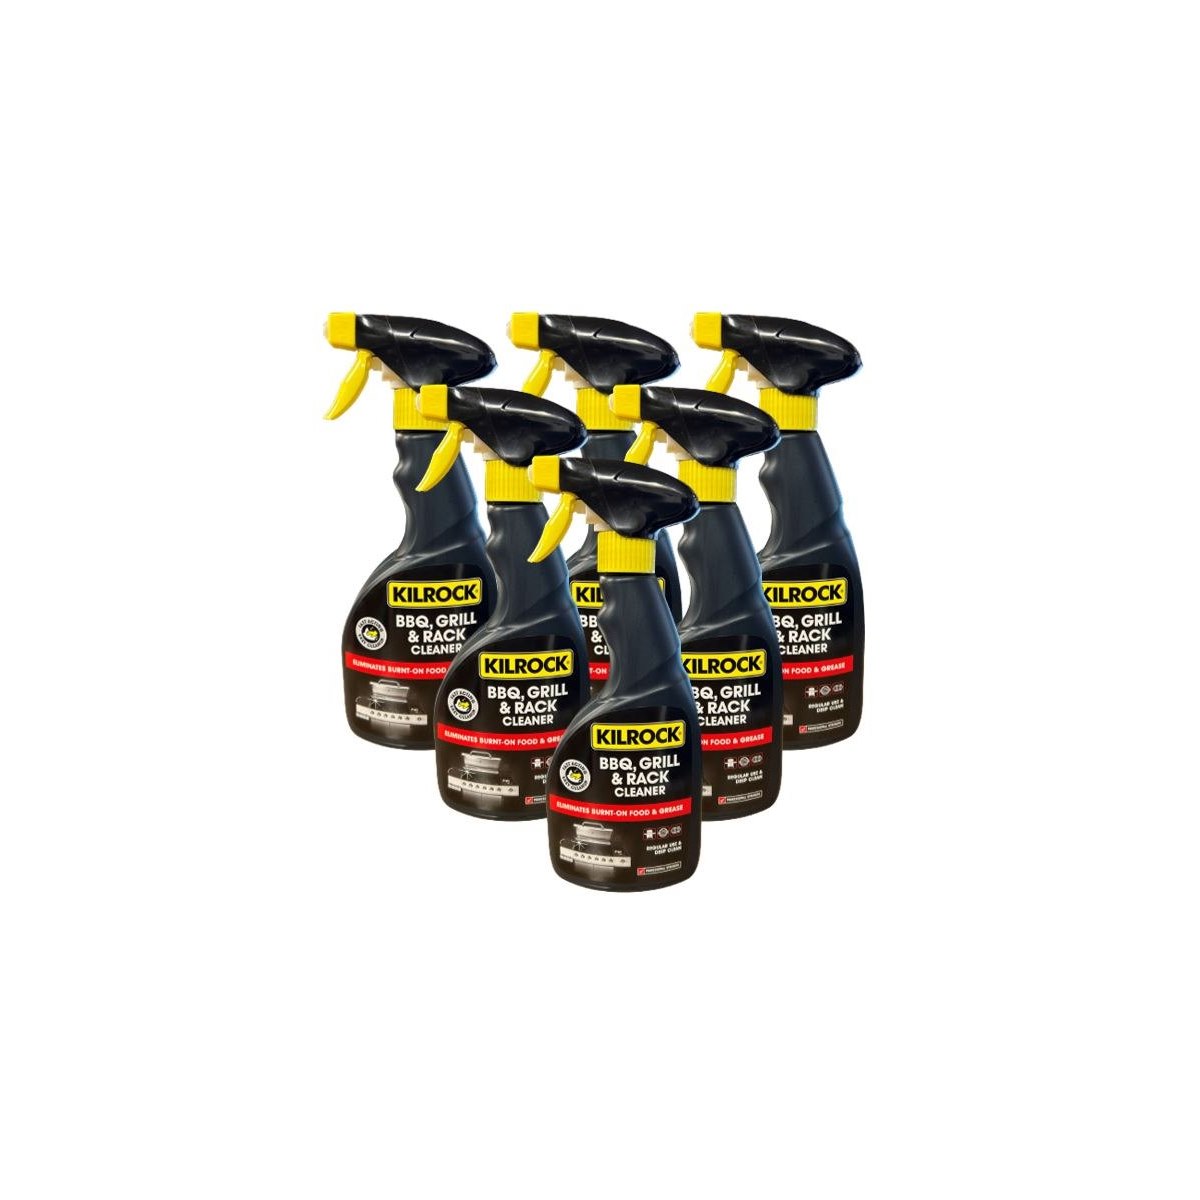 Case of 6 x Kilrock BBQ, Grill and Rack Cleaner Spray 500ml